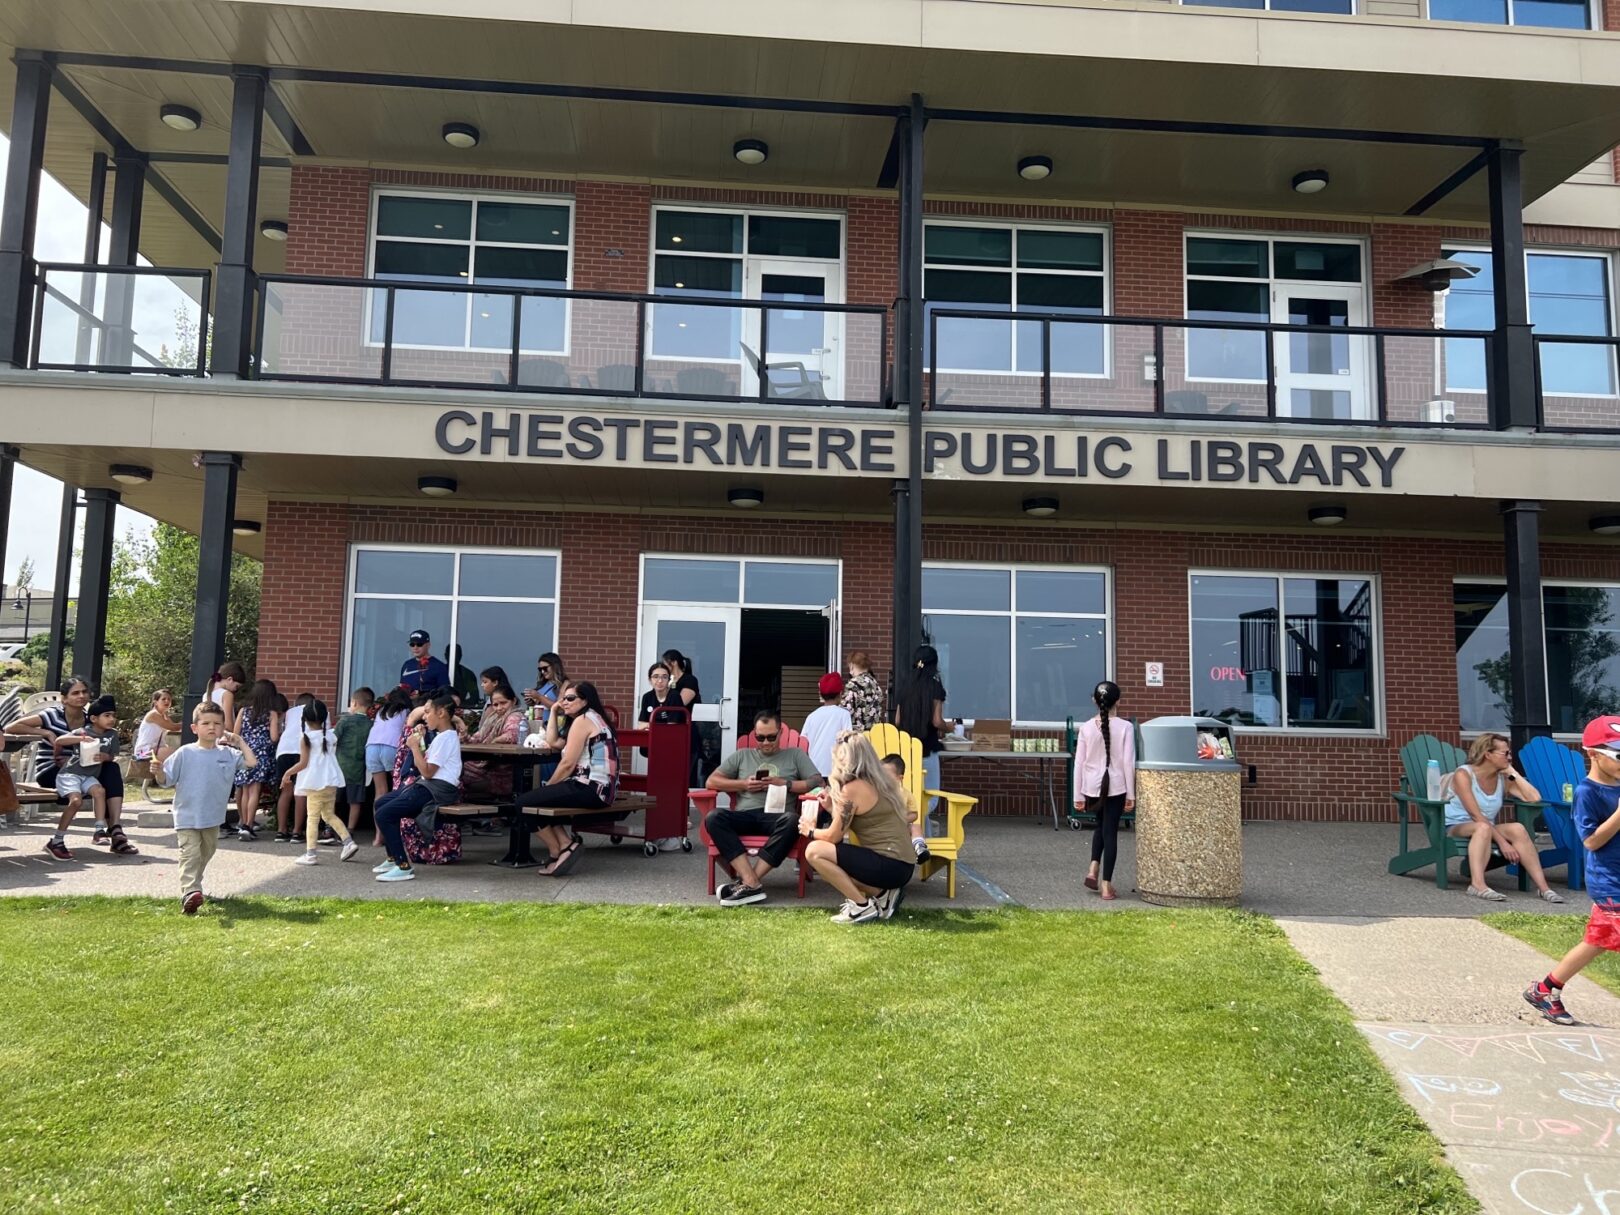 Chestermere Public Library continues to support residents